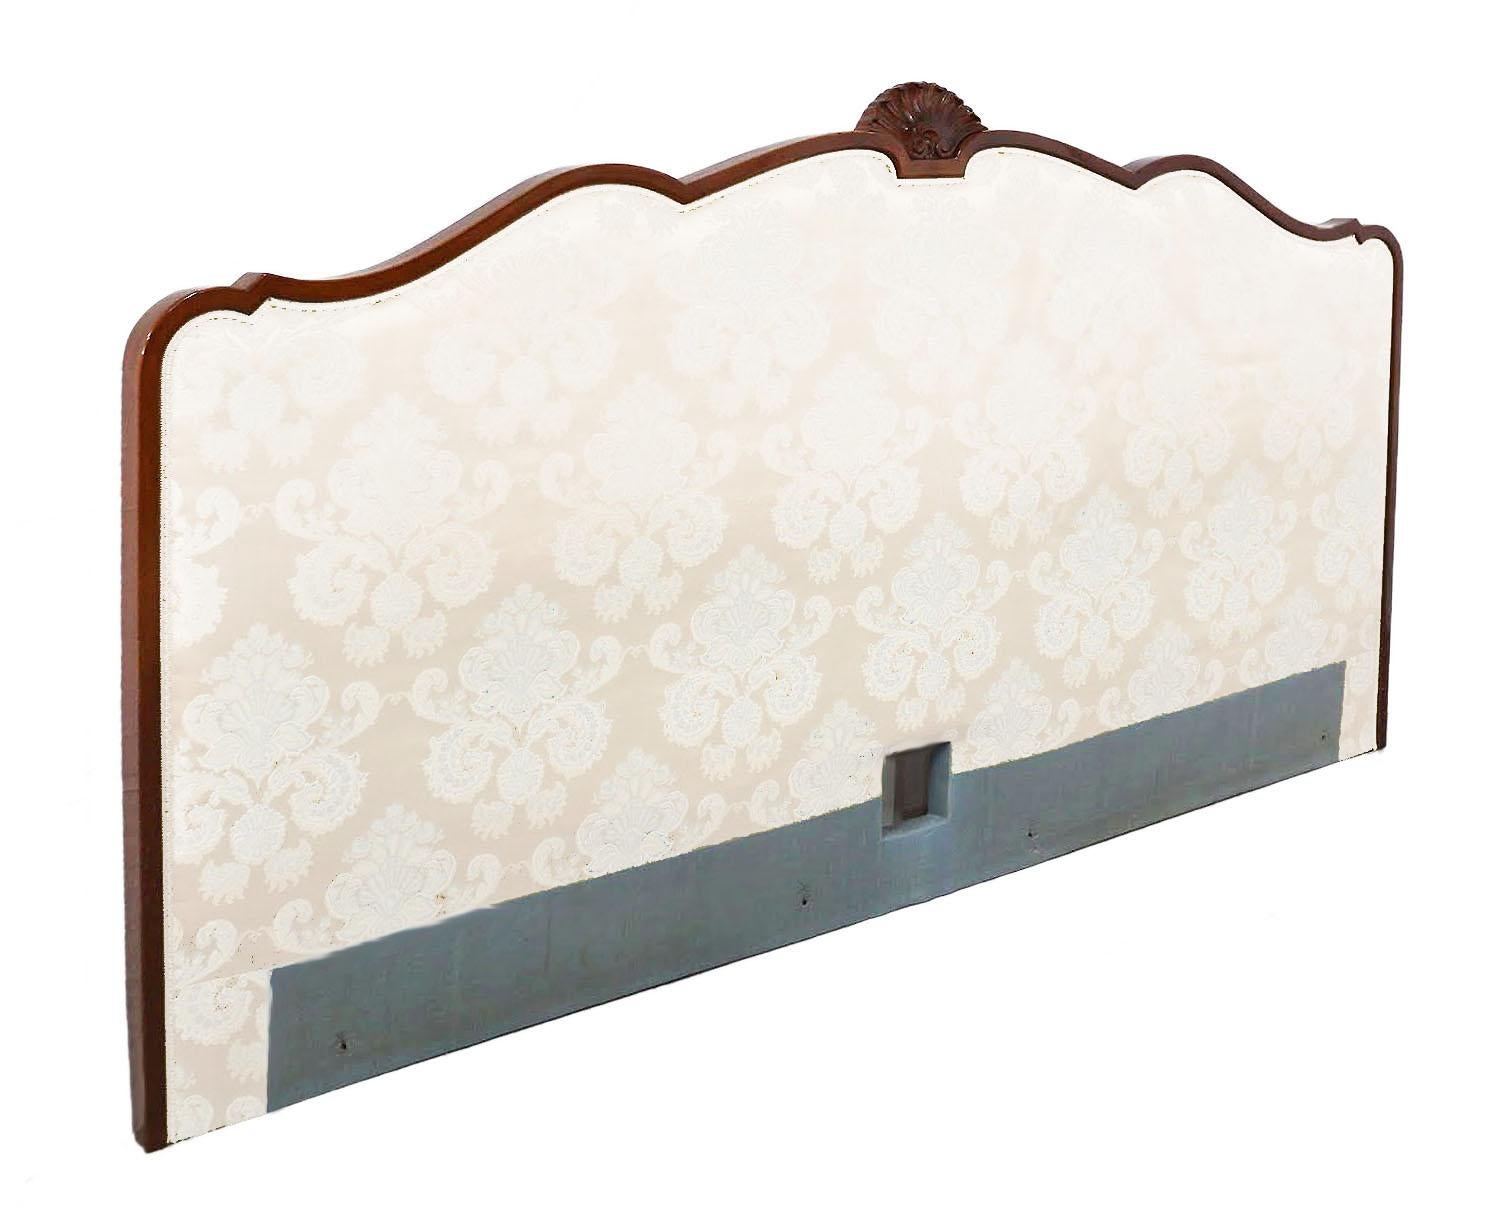 Vintage French headboard upholstered late 20th century Louis 
Price includes recovering to fabric of your choice, excludes cost of fabric, bespoke detailing including stud work, piping etc
Color simulations shown and the present fabric is pale green